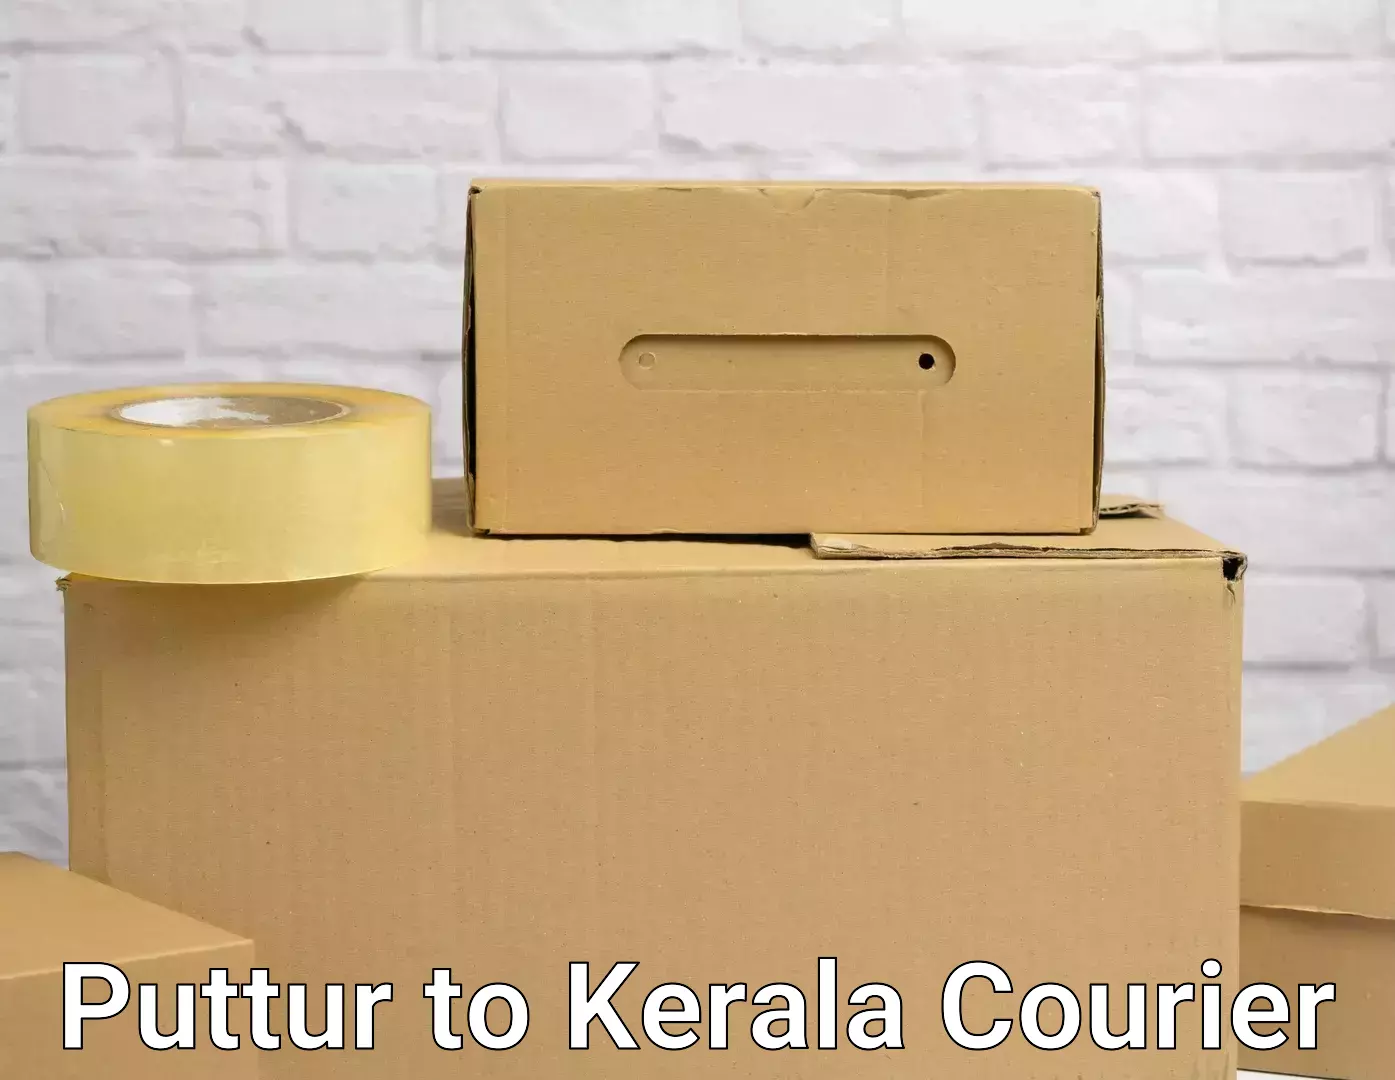 Home moving experts Puttur to Kerala